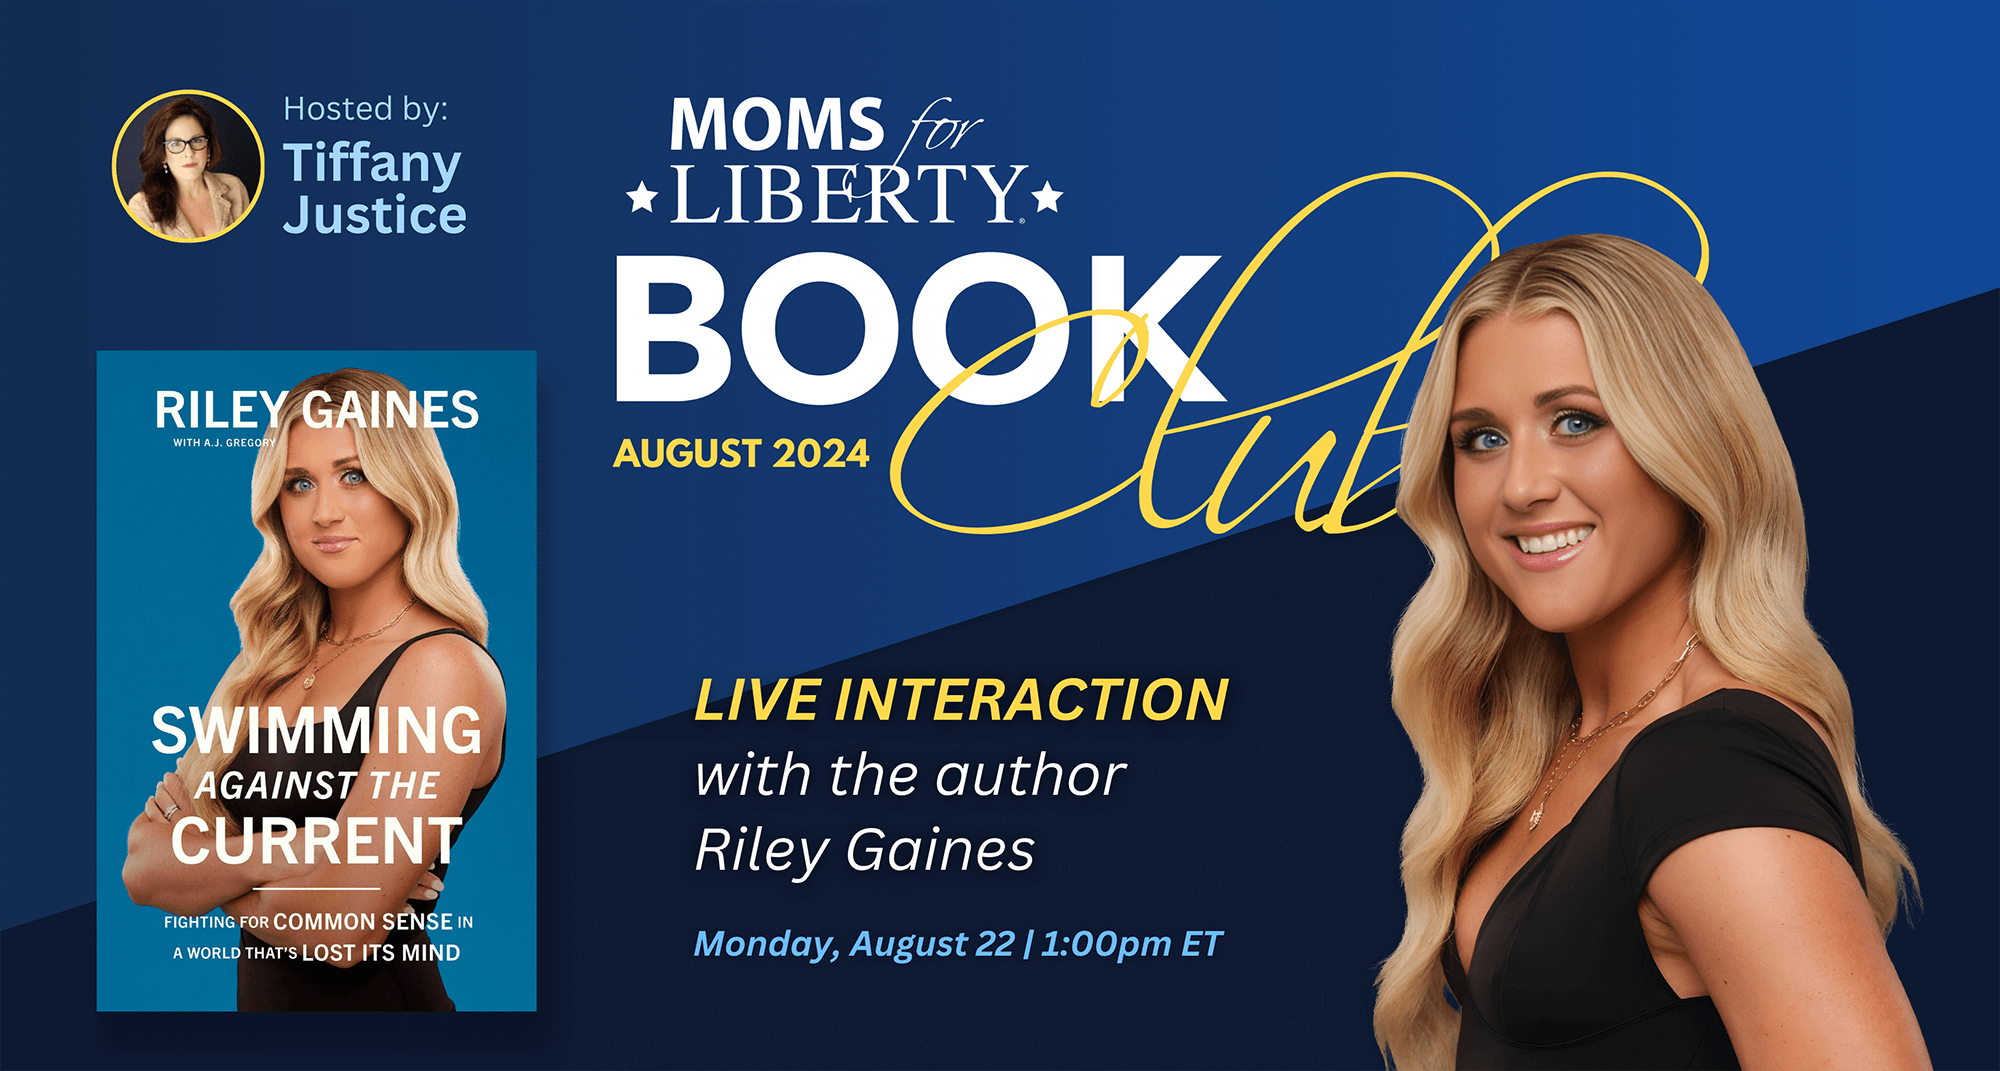 August Book Club: "Swimming Against the Current" with author Riley Gaines